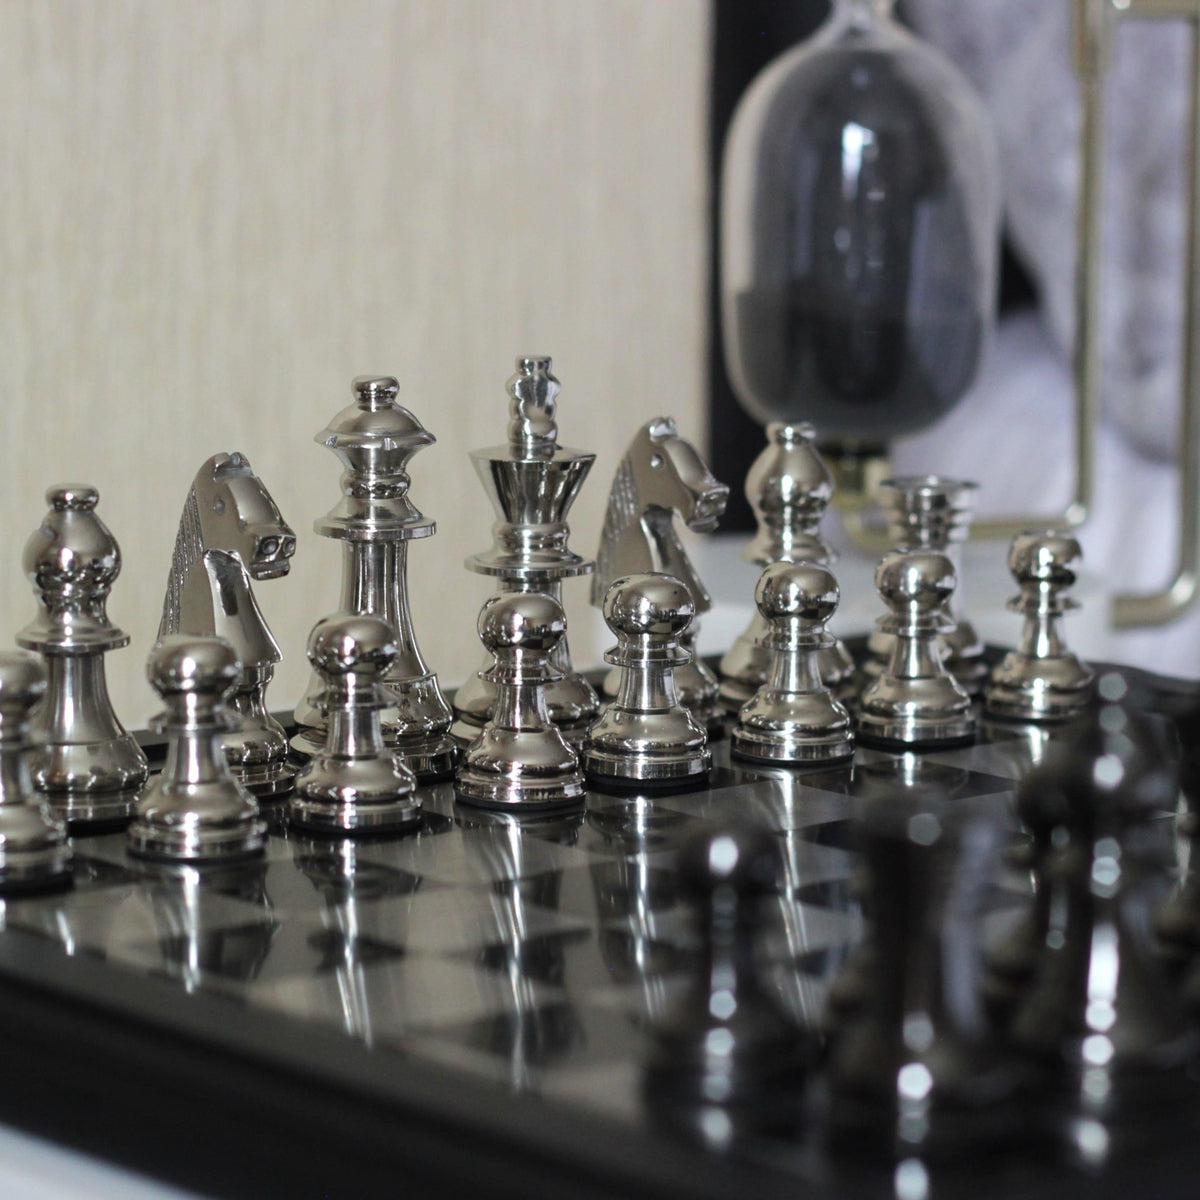 The English Opening - Black and Silver Metallic Chess Set - Marble Cultures